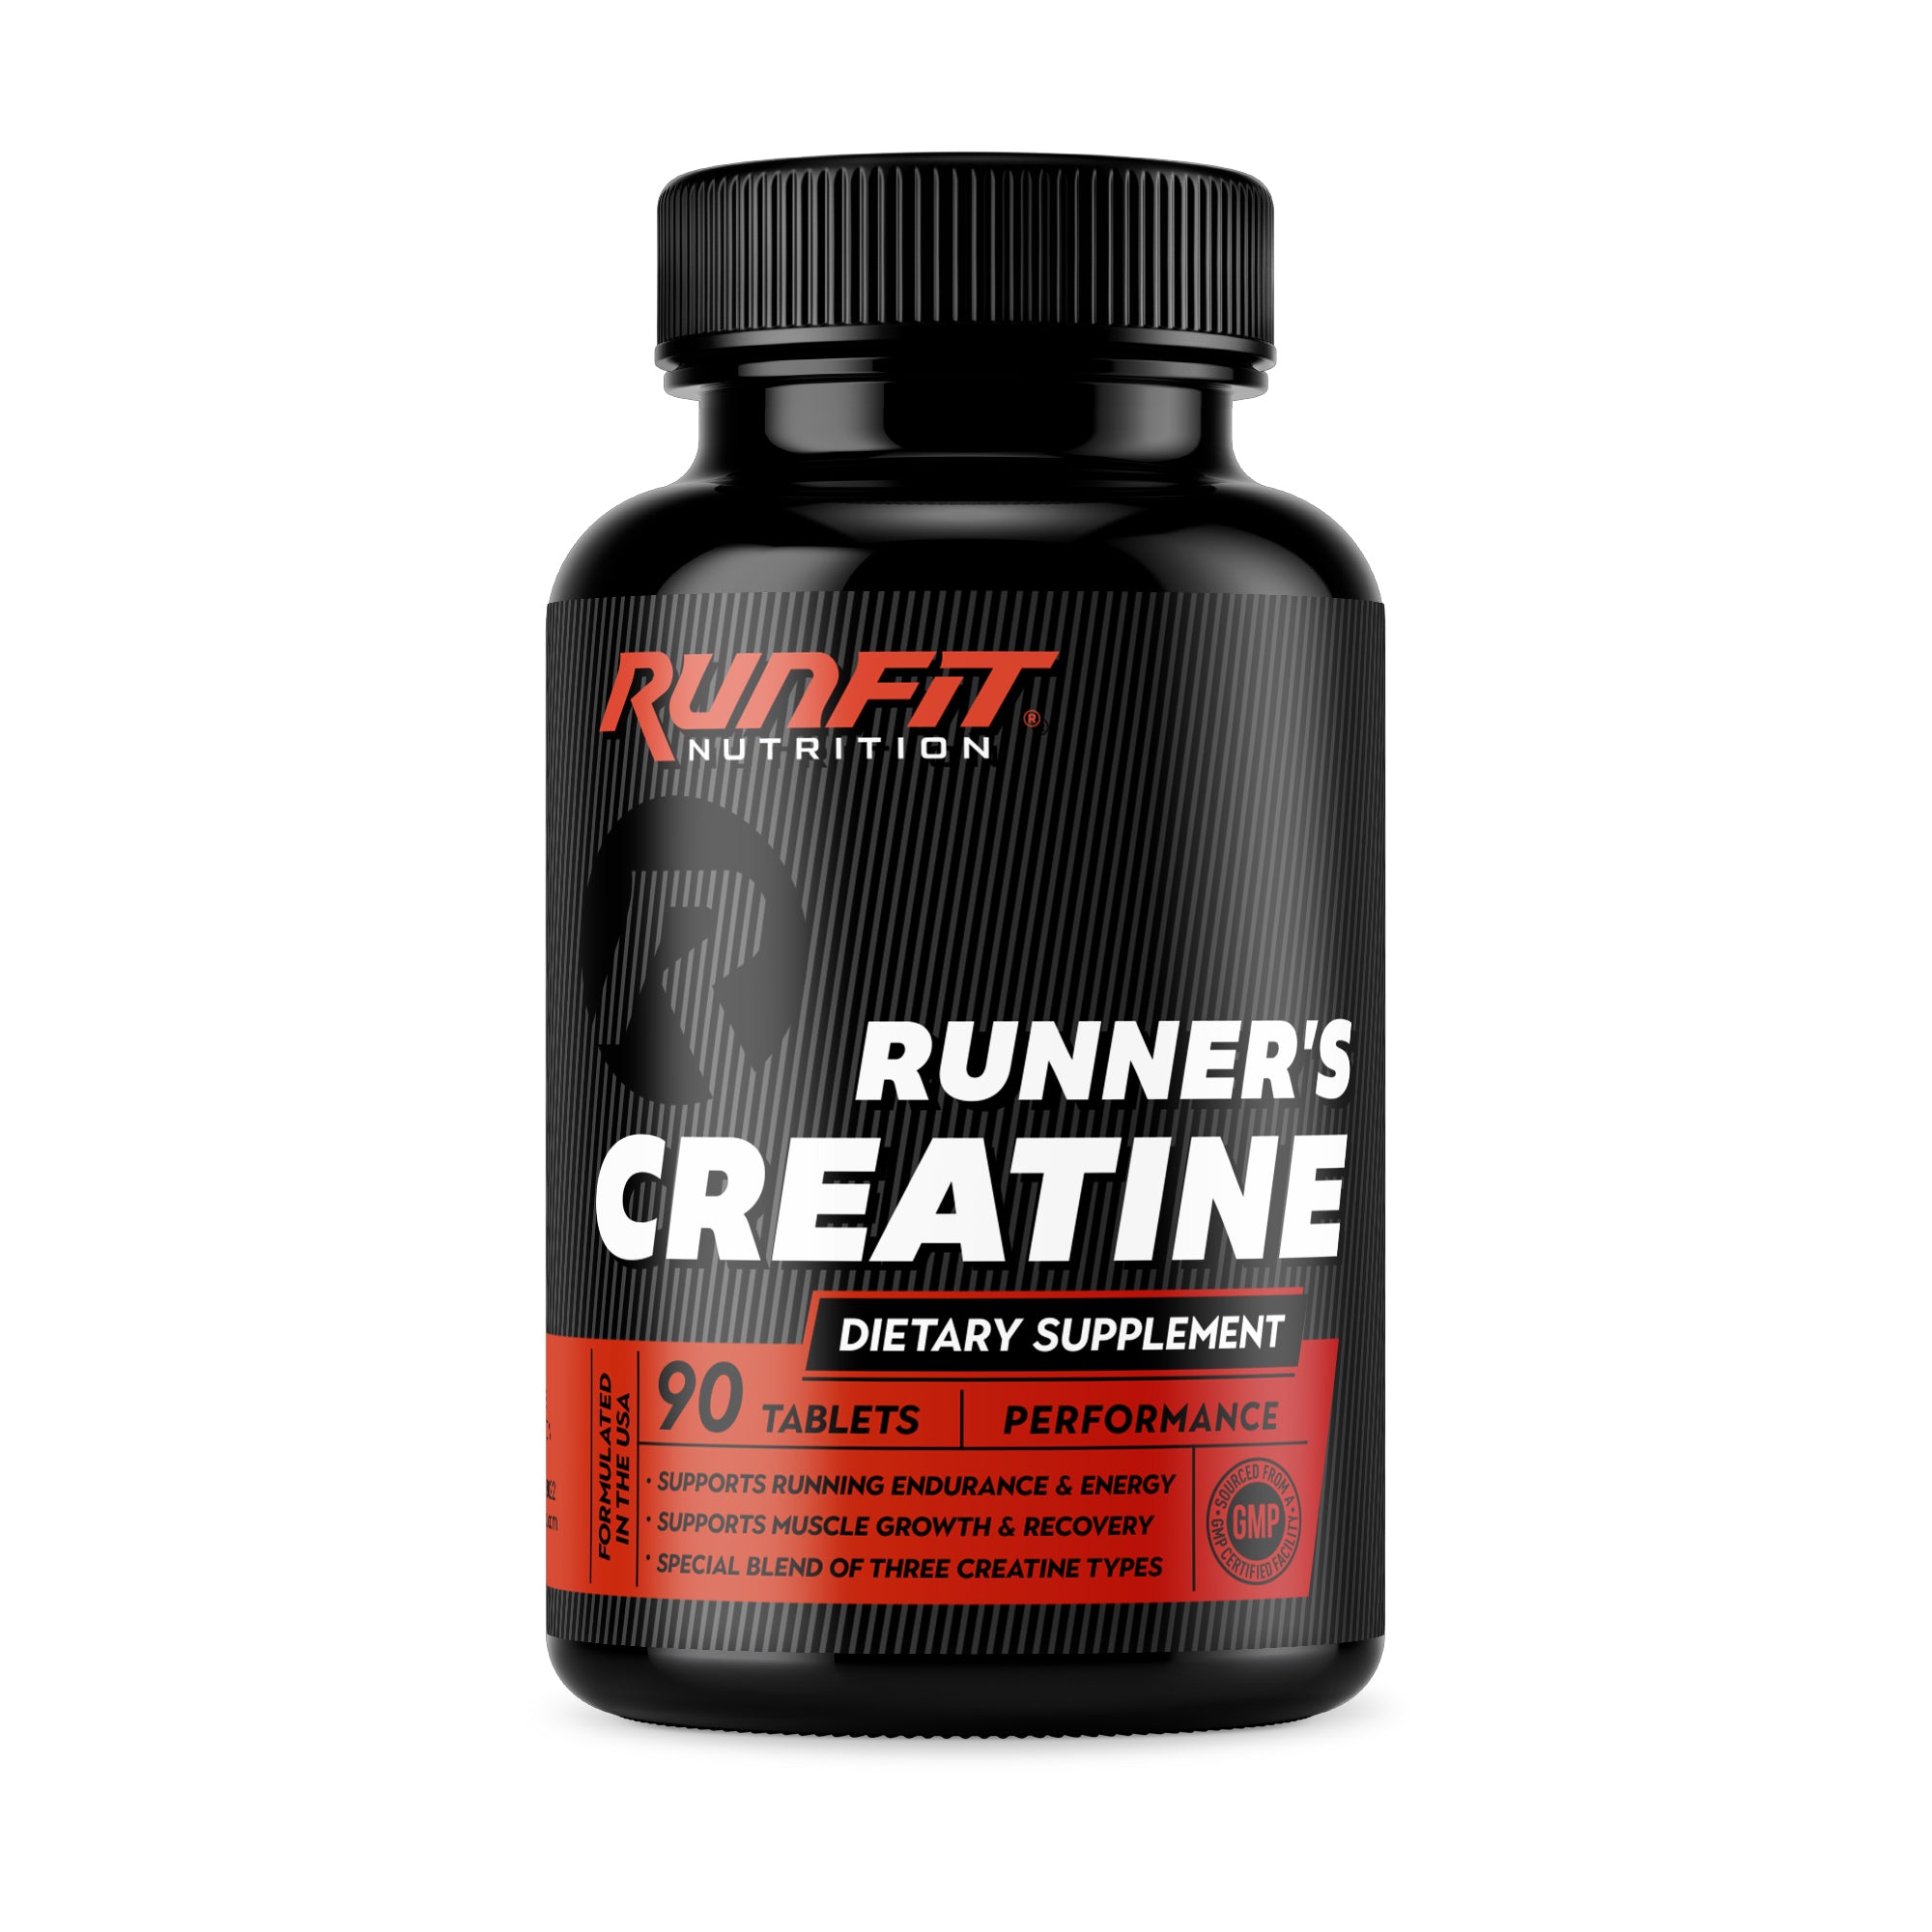 Runner's Creatine | Best Recovery Supplements for Runners